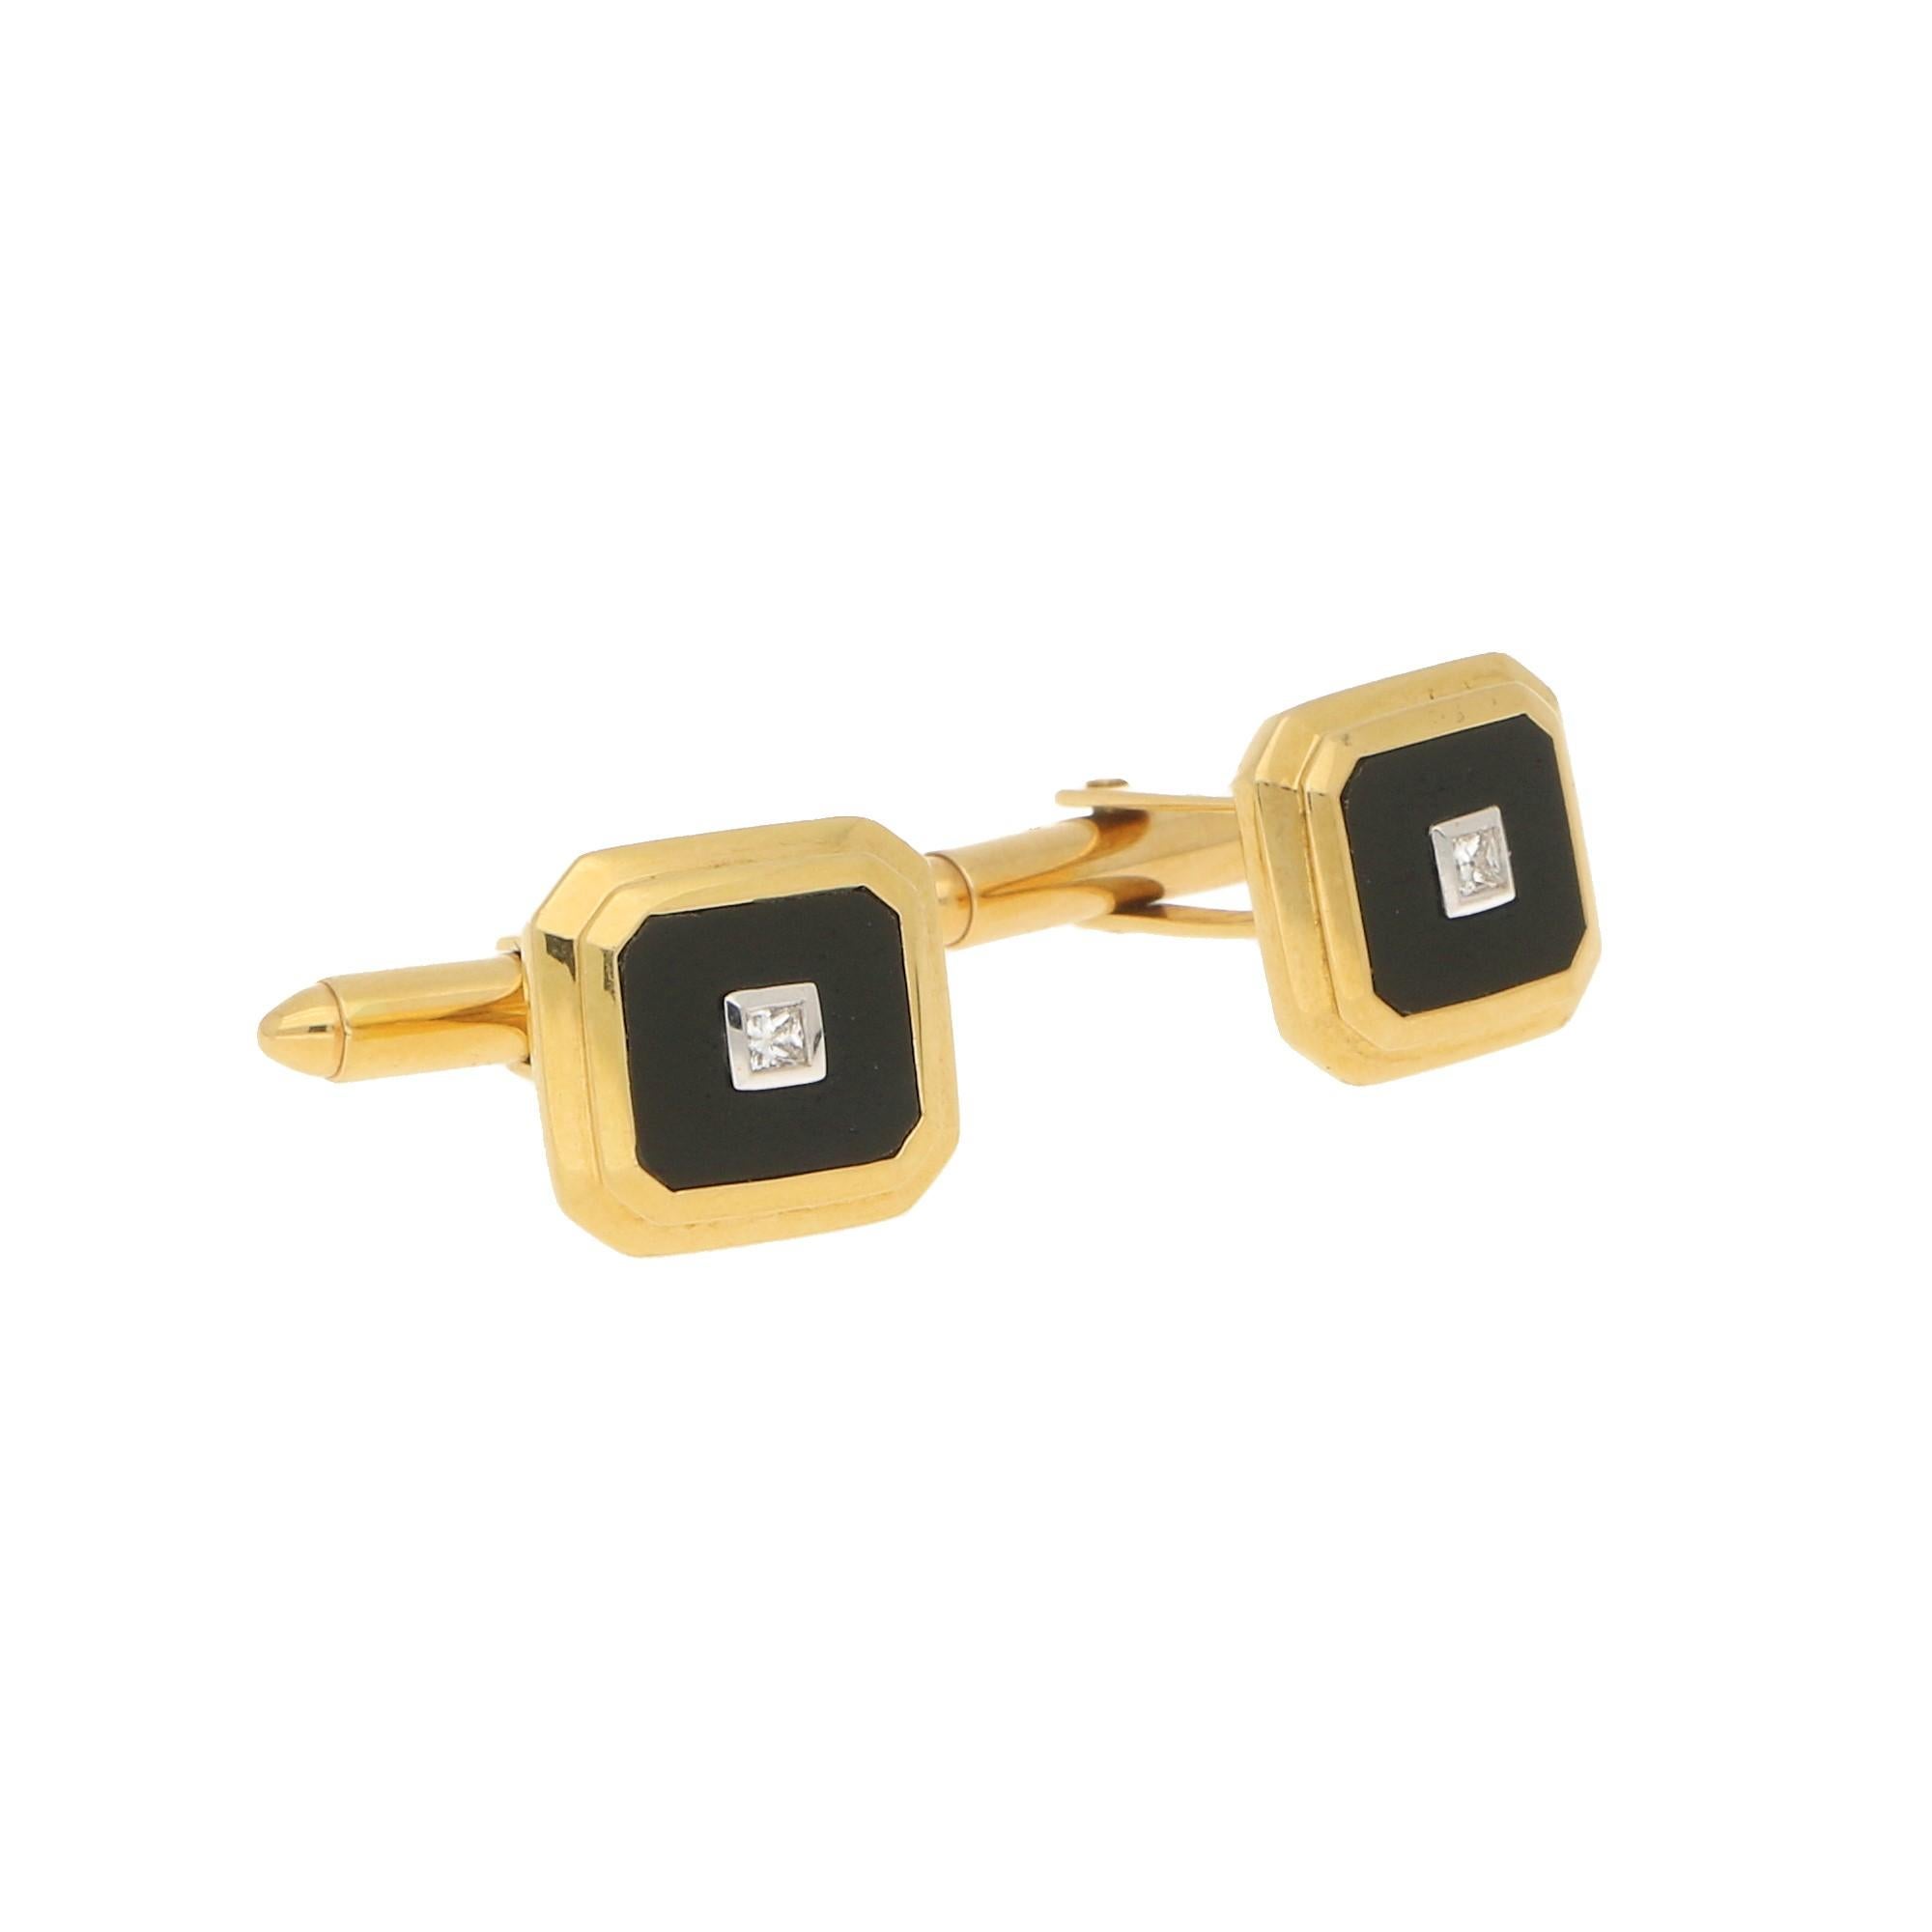 A pair of diamond and onyx geometric cufflinks in 18-karat yellow gold.  Each cufflink features an octagonal tiered plaque in yellow gold, and an onyx plaque at it's center, which in turn is further accented with a princess-cut diamond in a white